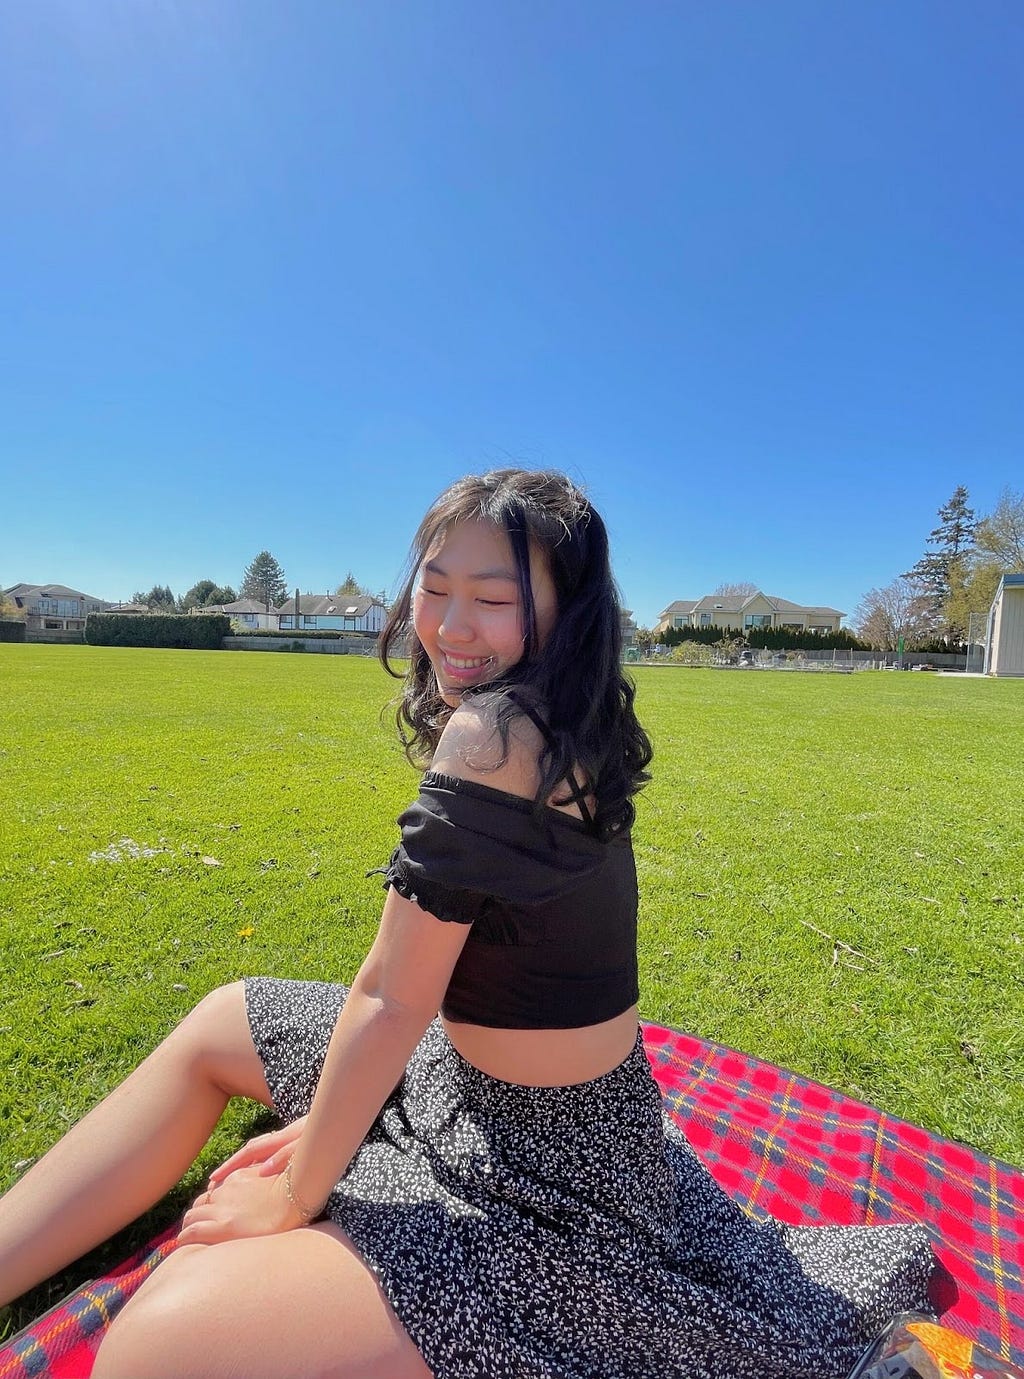 Photograph of smiling Chinese-American woman with black hair. She is sitting on a grassy field, wearing a black top and a long black floral skirt.